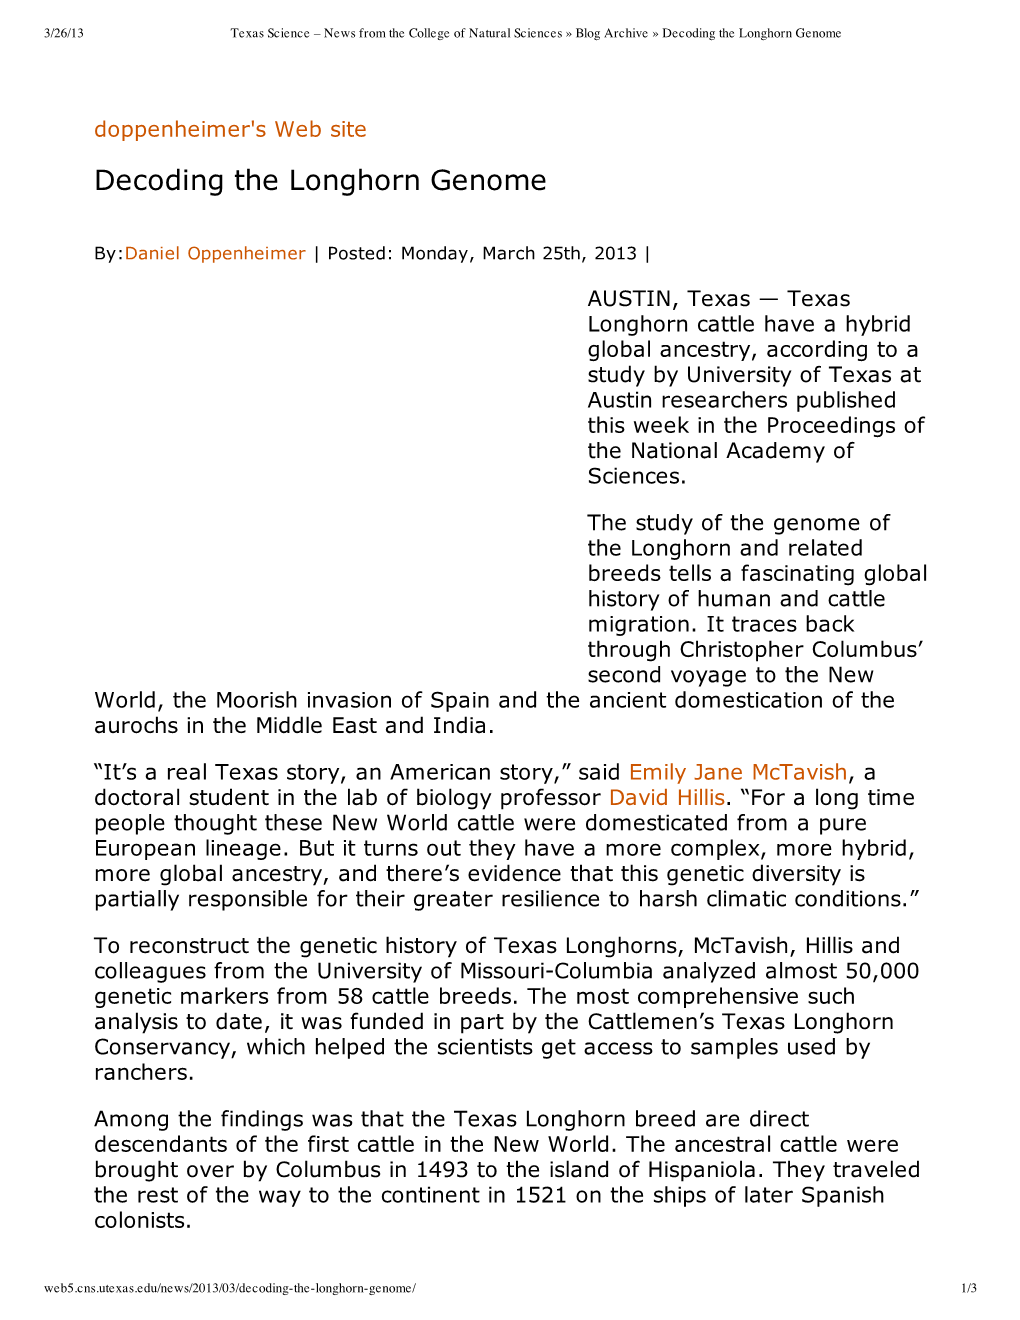 Decoding the Longhorn Genome